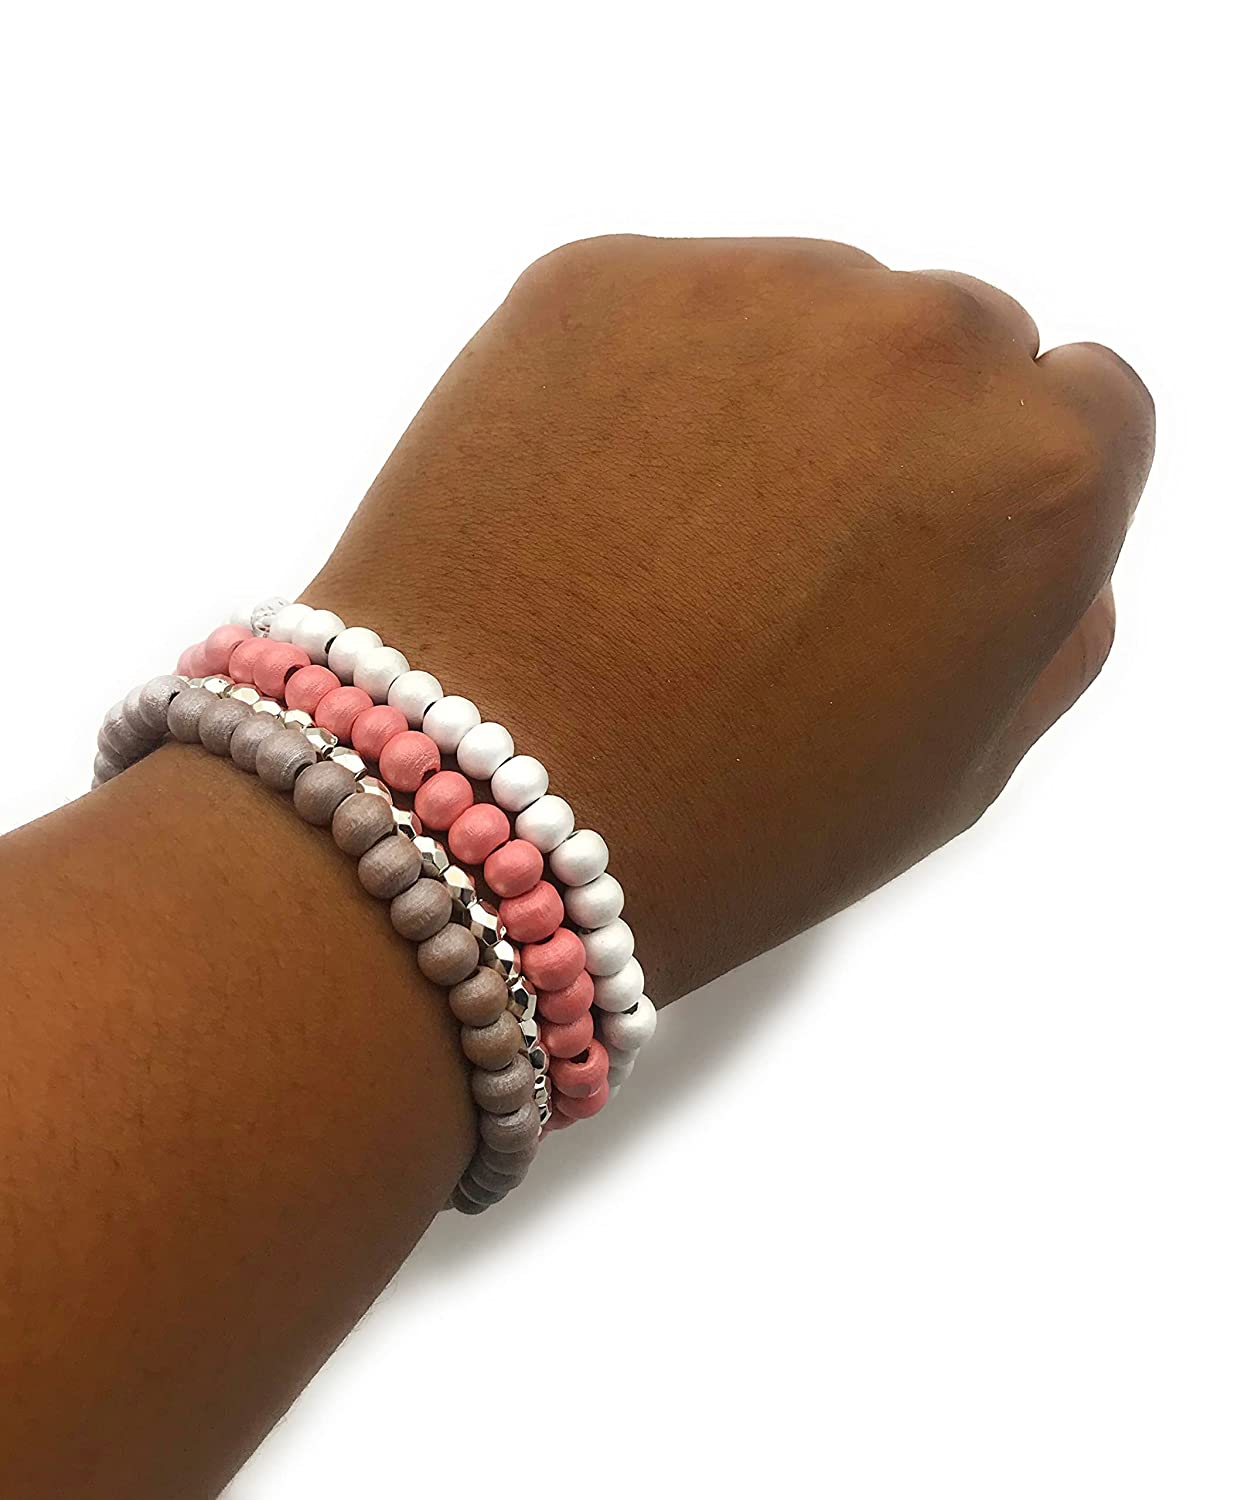 Set of 4 Beaded Stretch Bracelets in Pink Grey and White with Silver Accent